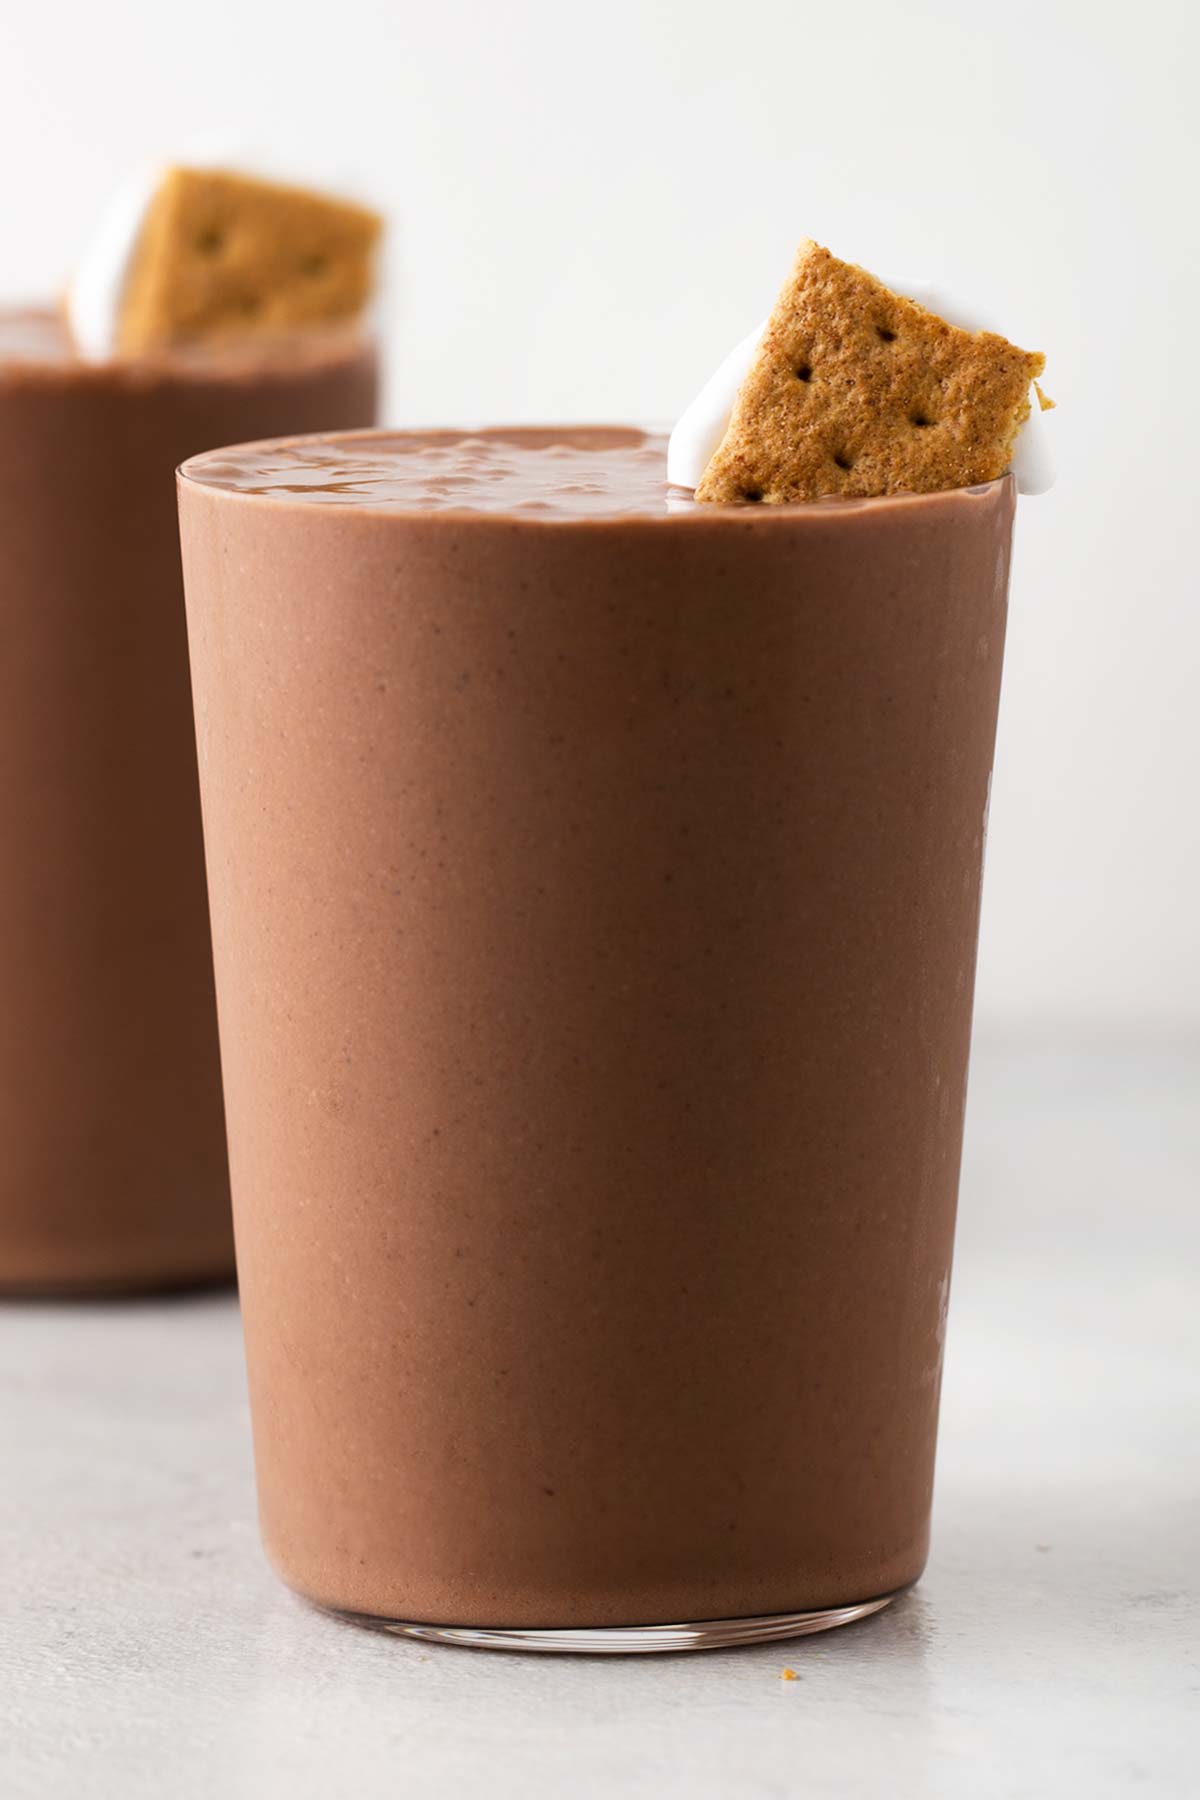 S'mores smoothie in a cup.